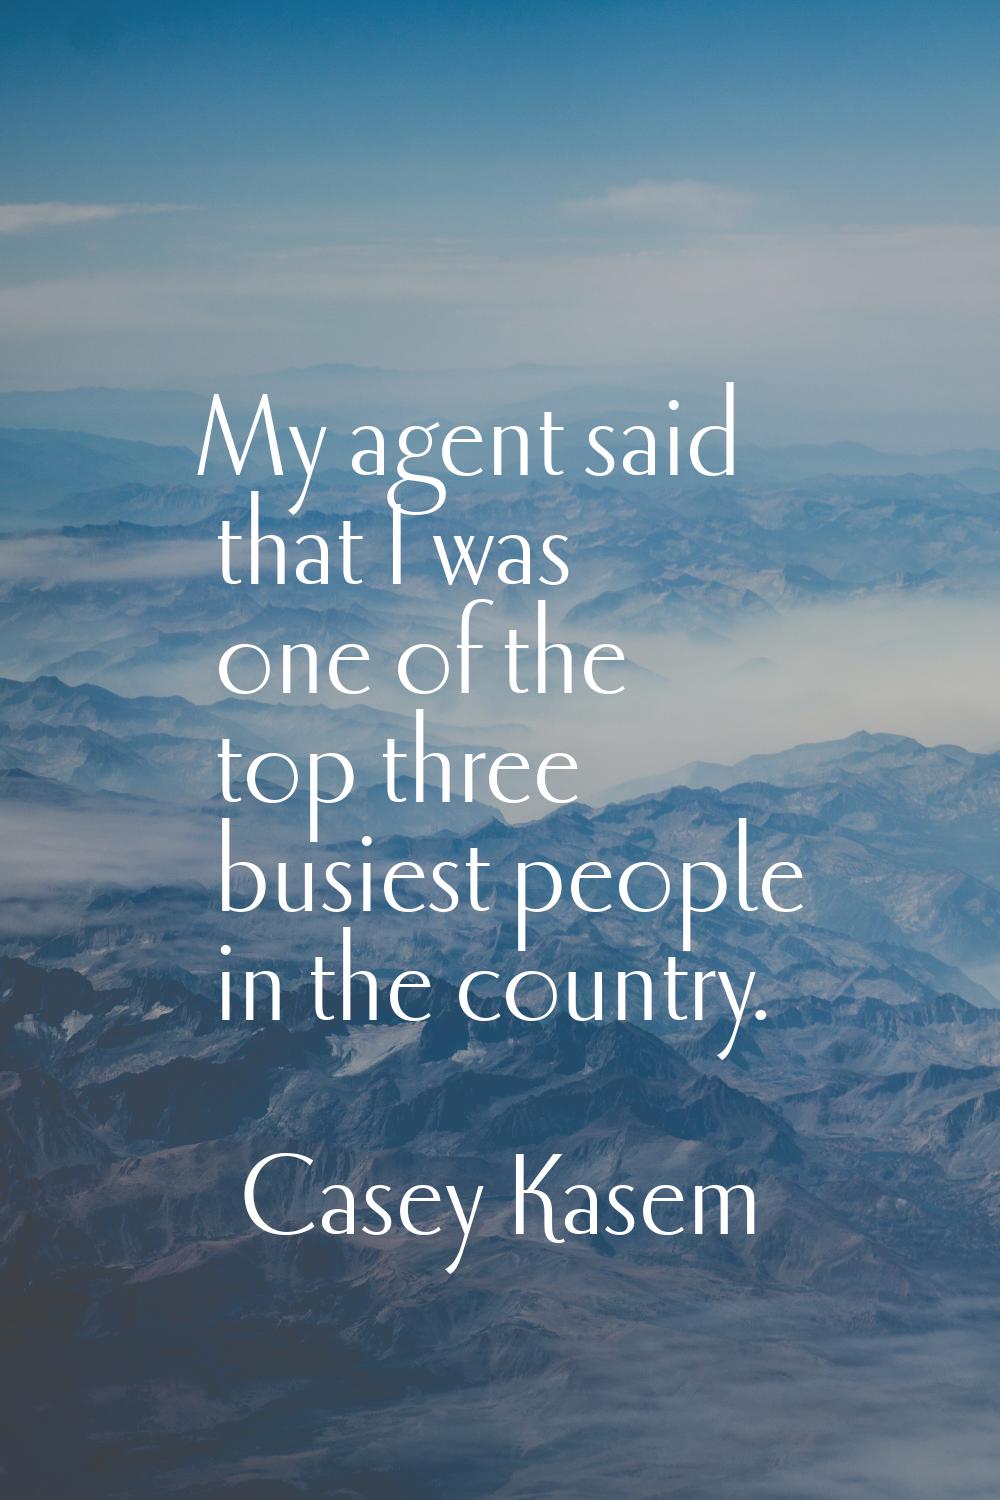 My agent said that I was one of the top three busiest people in the country.